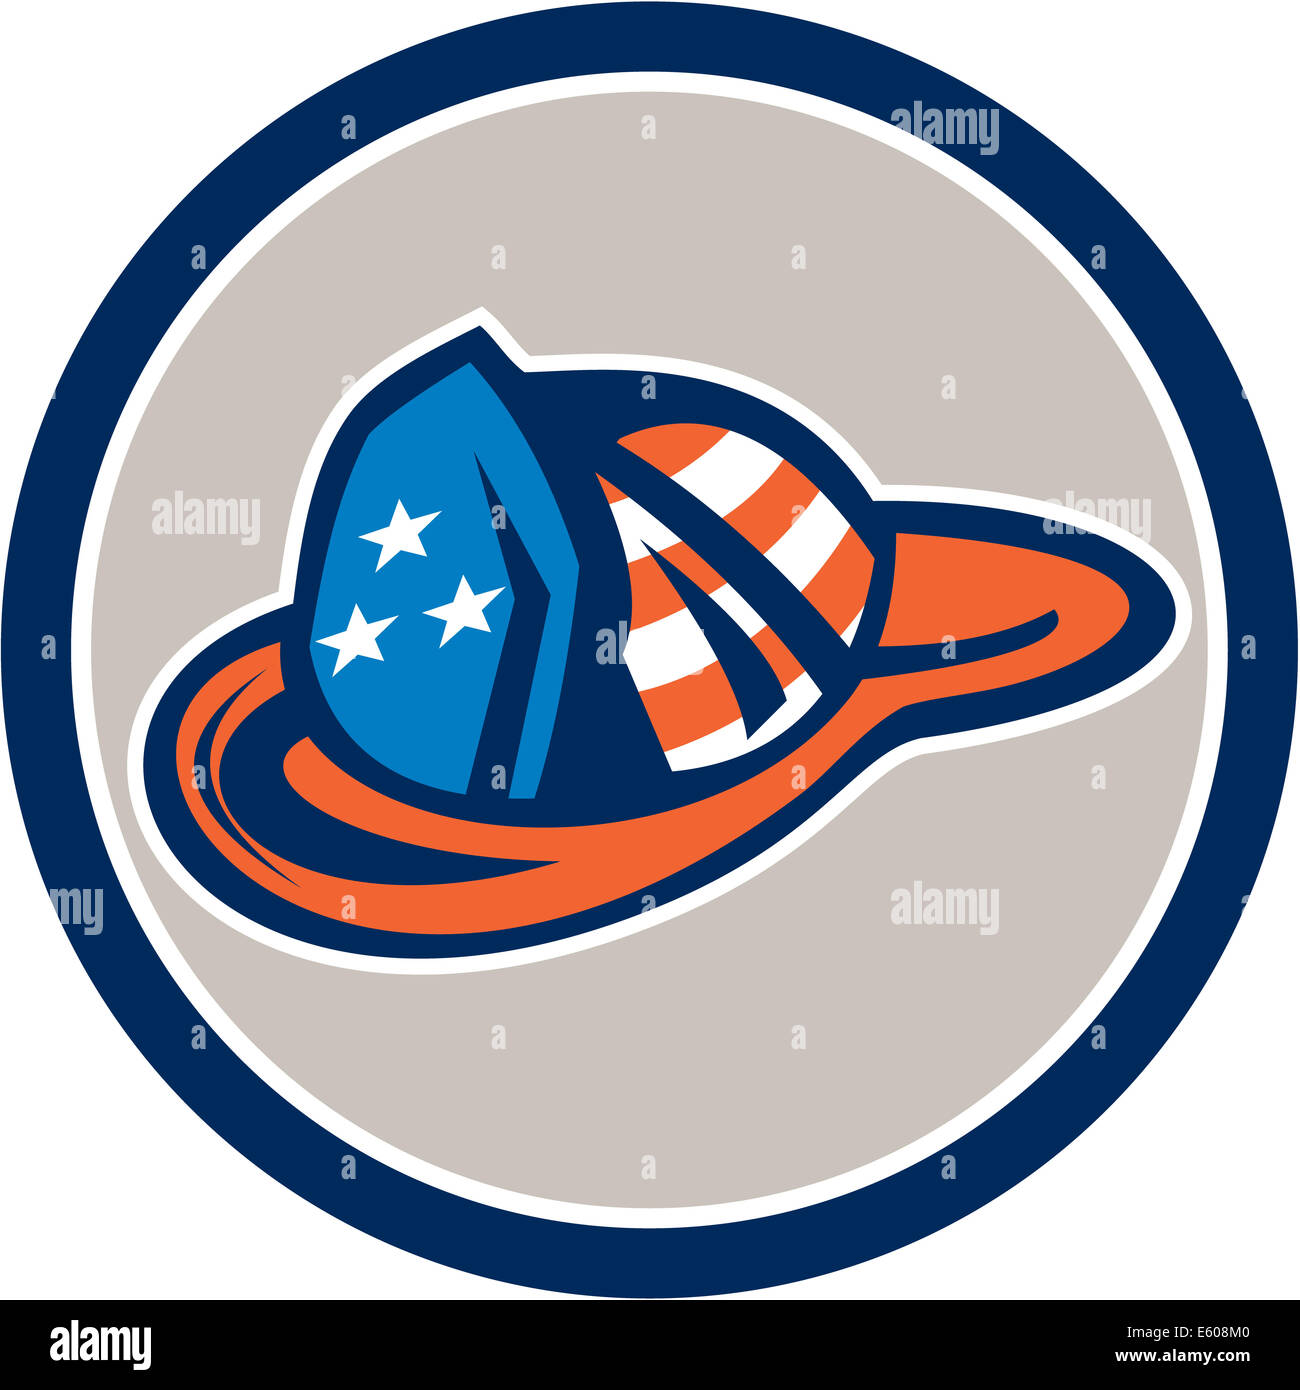 Illustration of a fireman hat helmet with usa stars and stripes design set inside circle on isolated white background done in retro style. Stock Photo